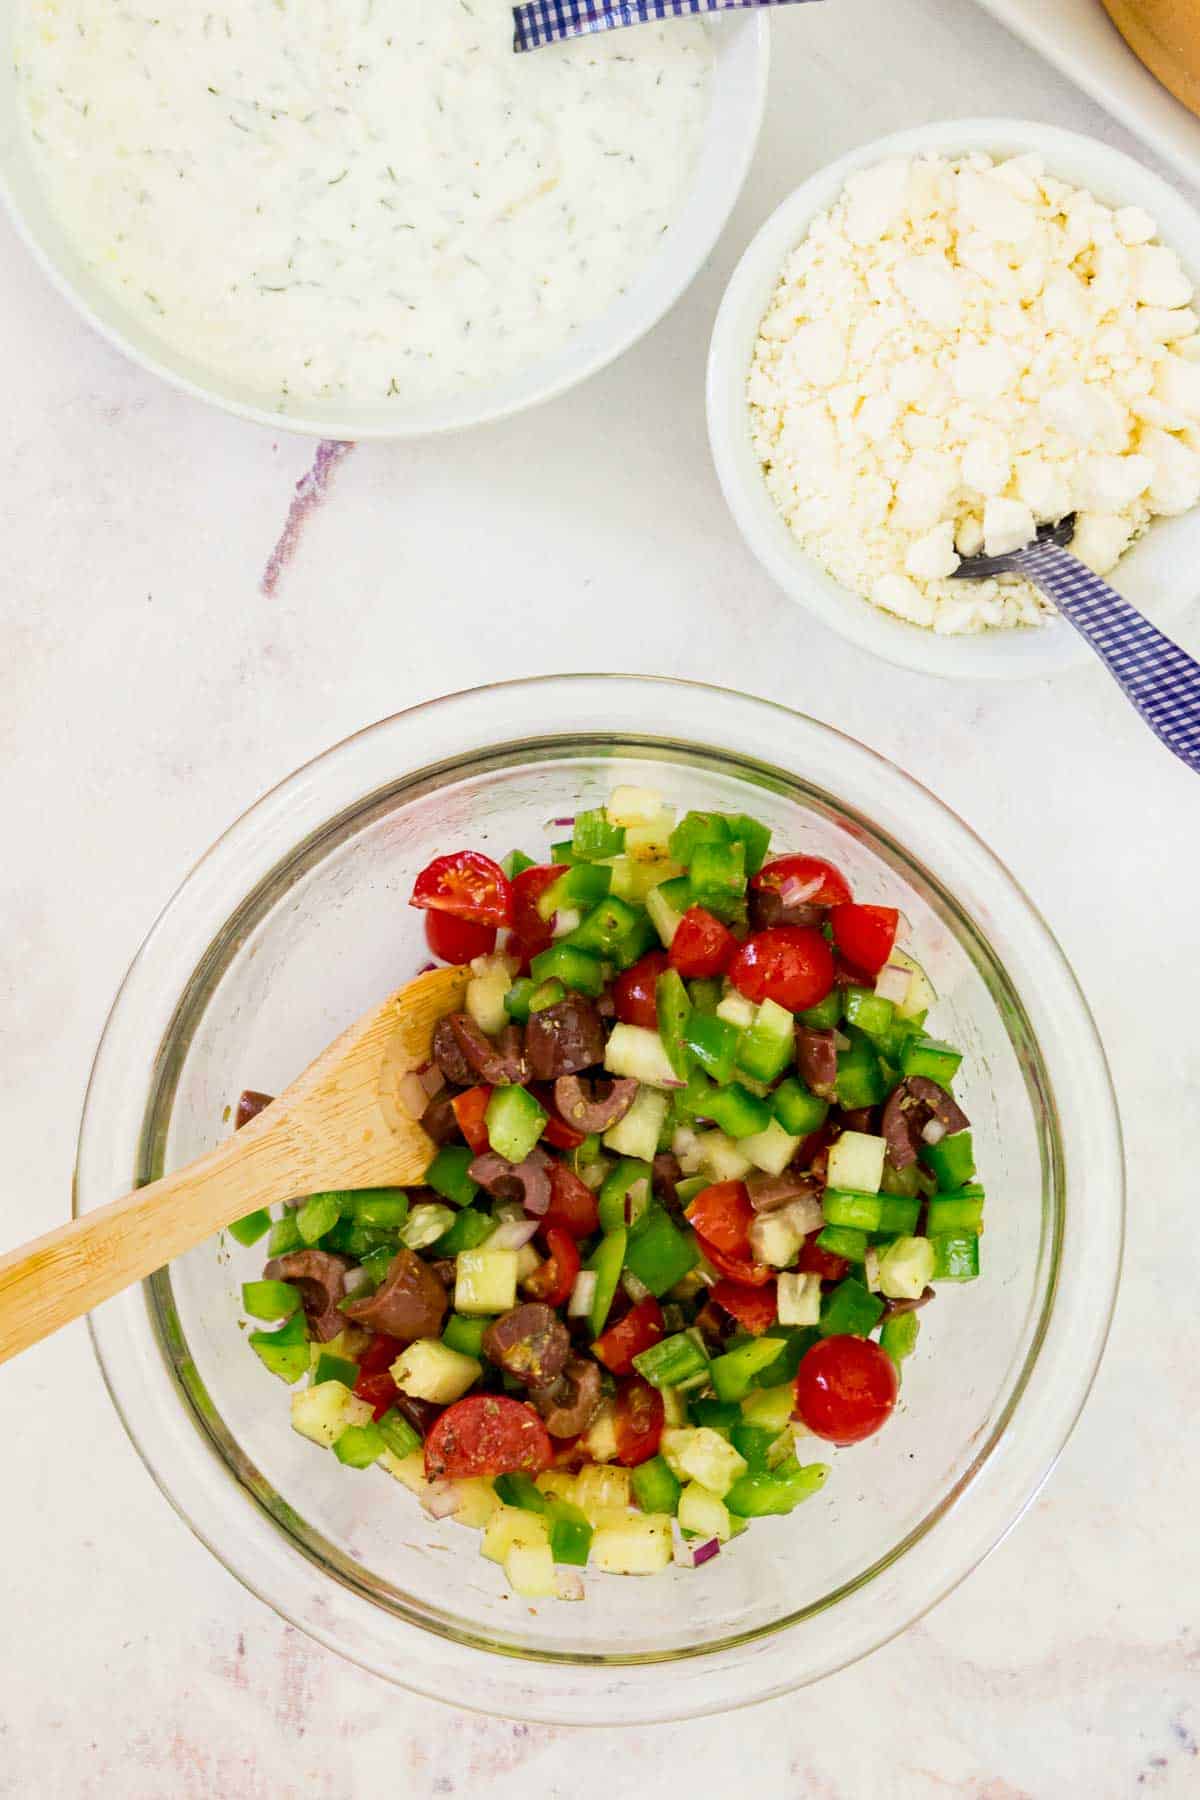 Greek salad topping mixed in a bowl with bowls of tzatziki and feta next to it.